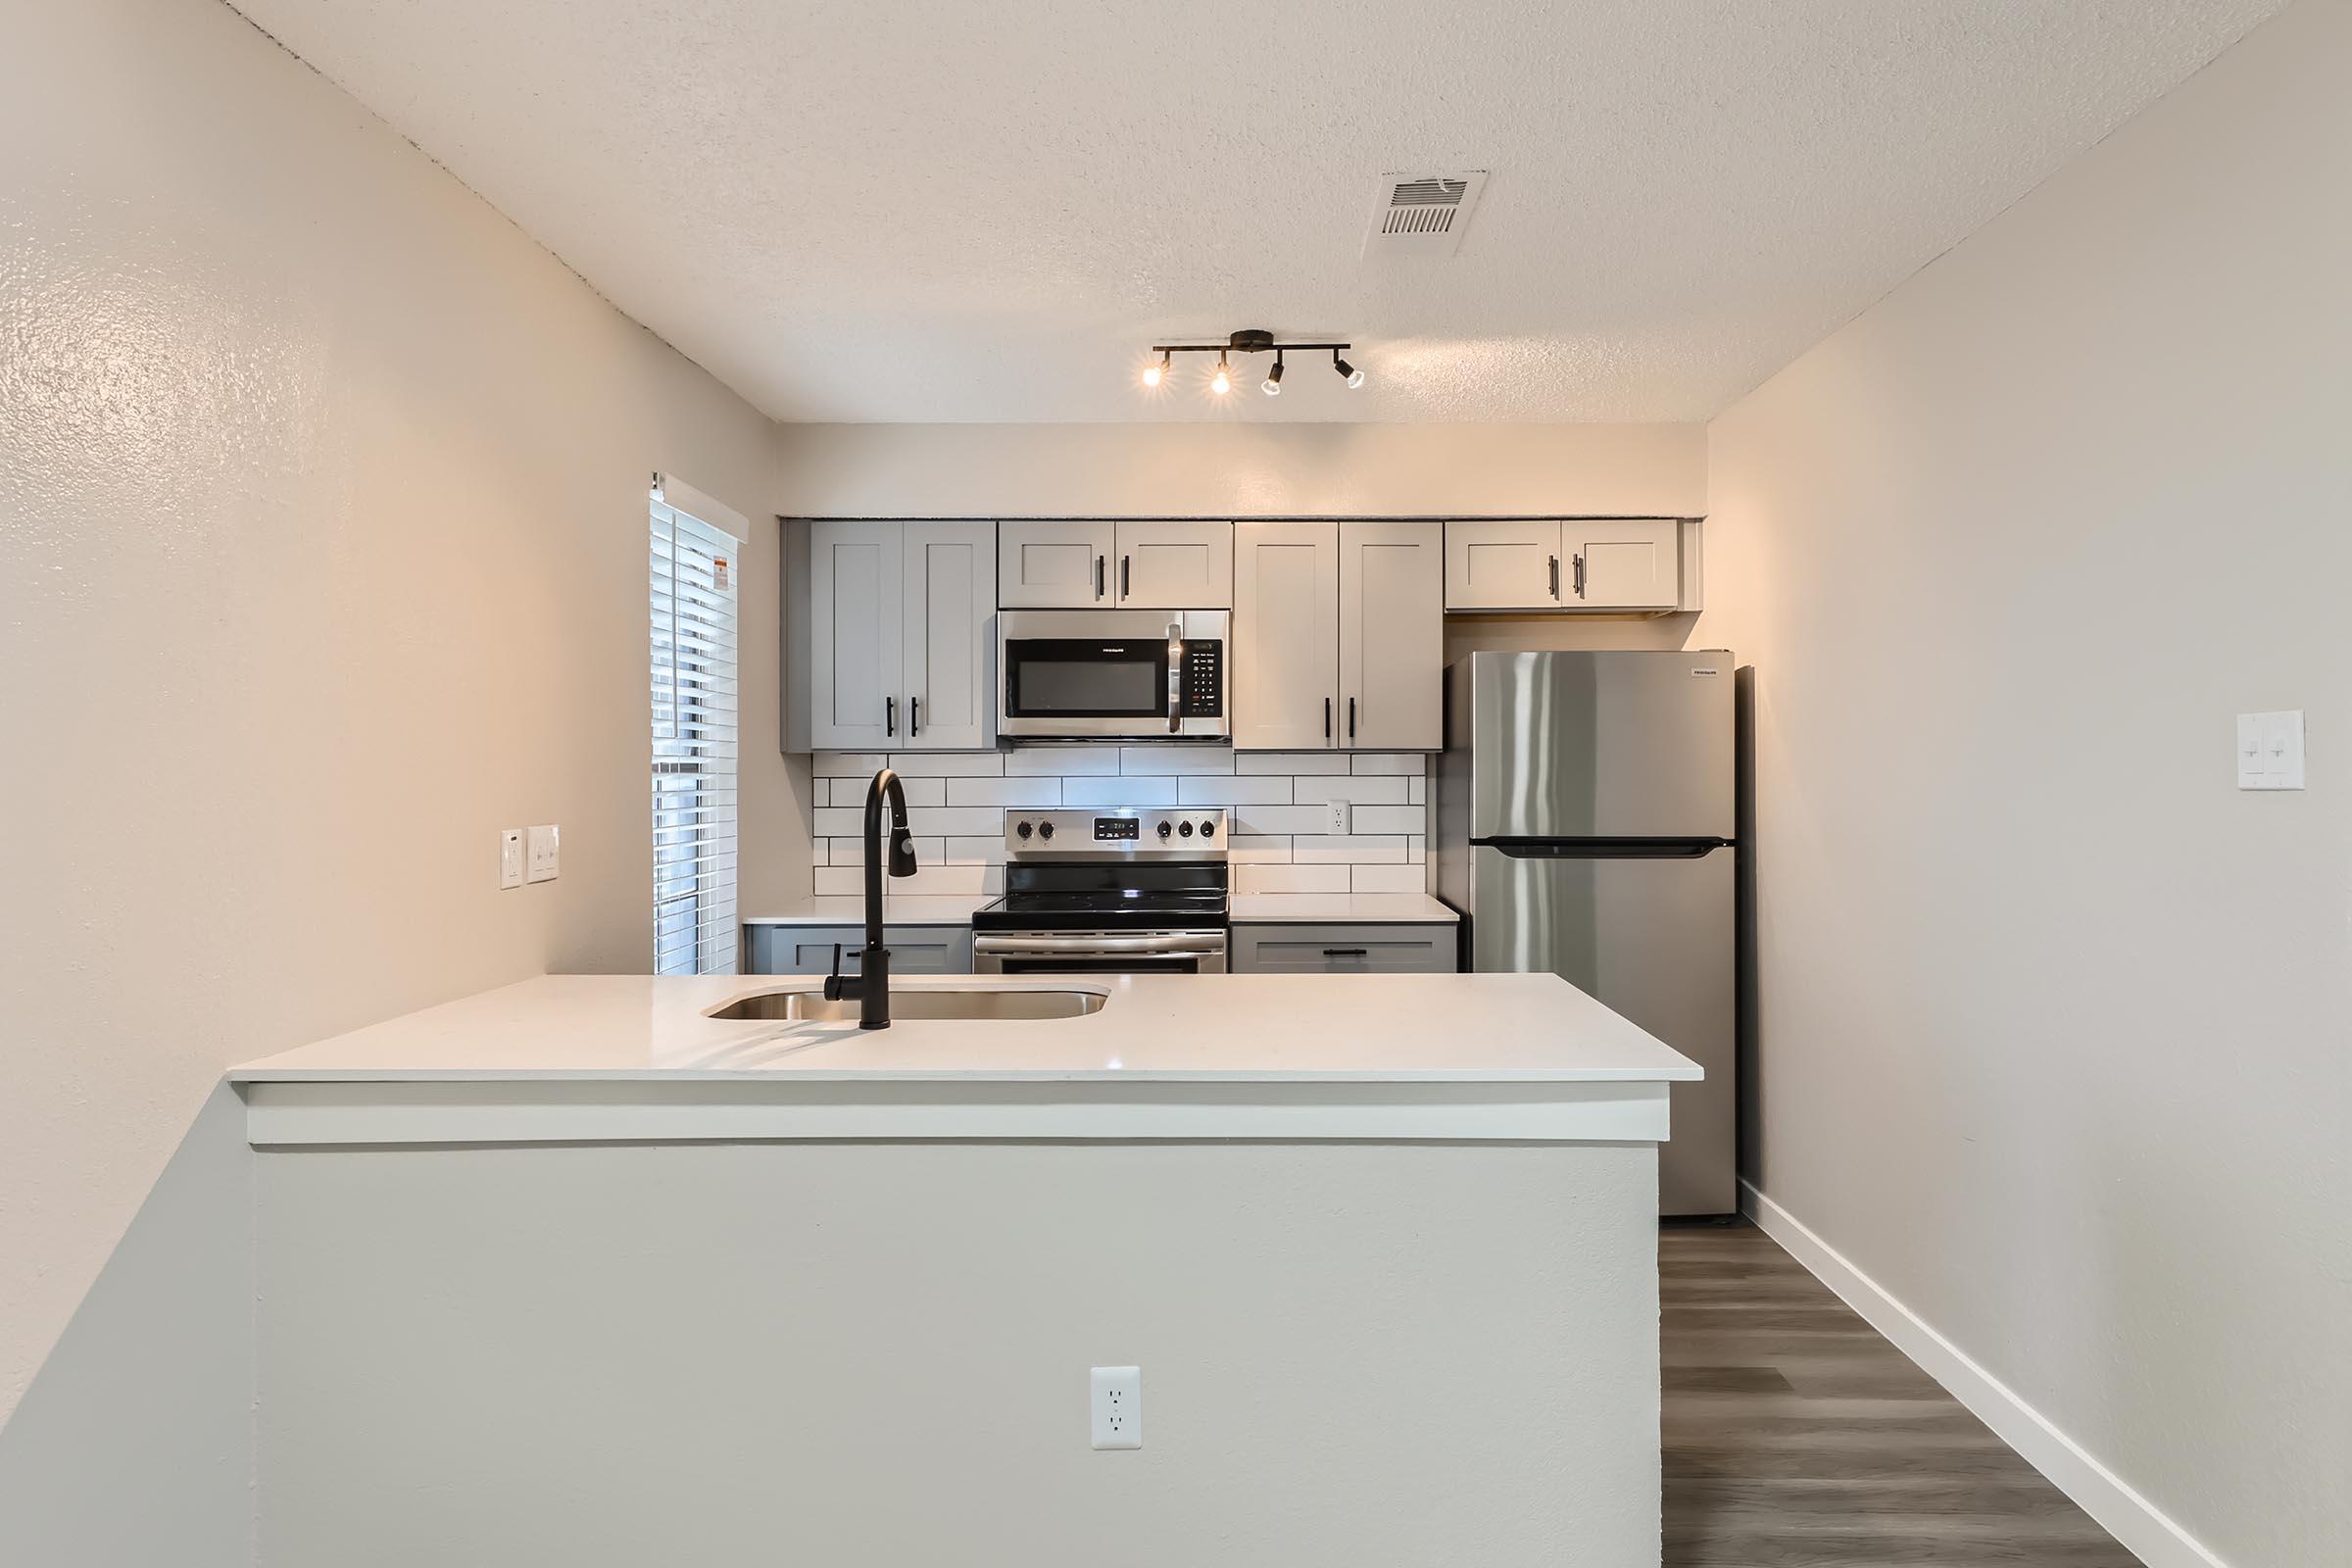 A kitchen with shaker cabinets and stainless steel appliances separated from the living space at Rise Oak Creek.